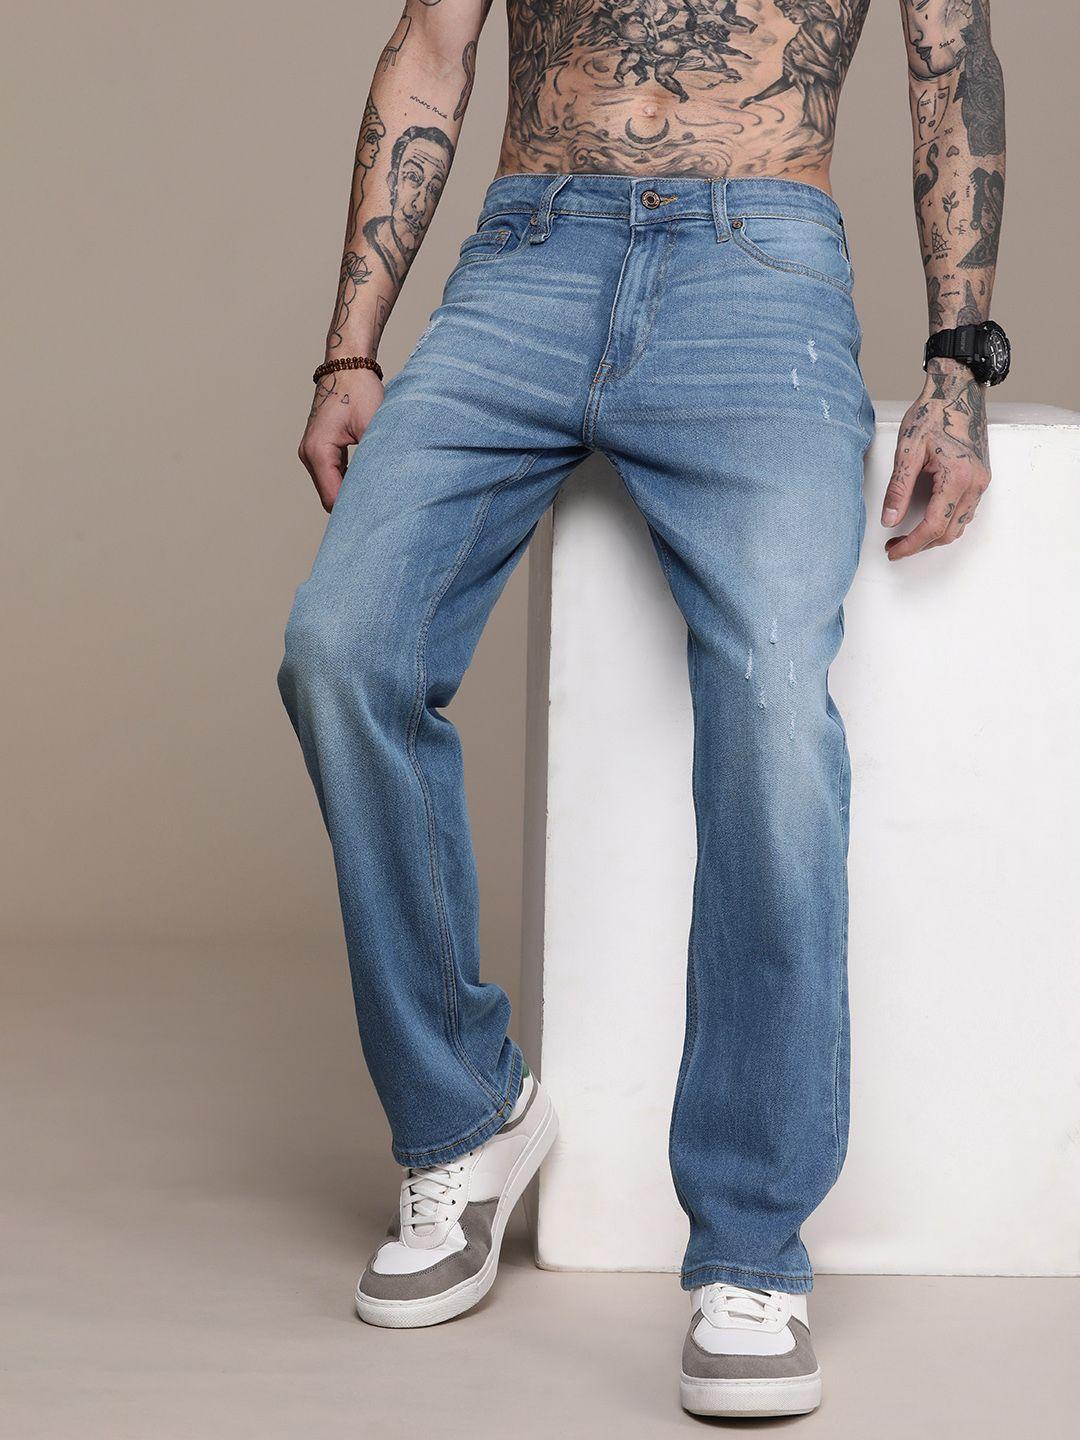 The Roadster Life Co. Men Heavy Fade Mildly Distressed Stretchable Jeans